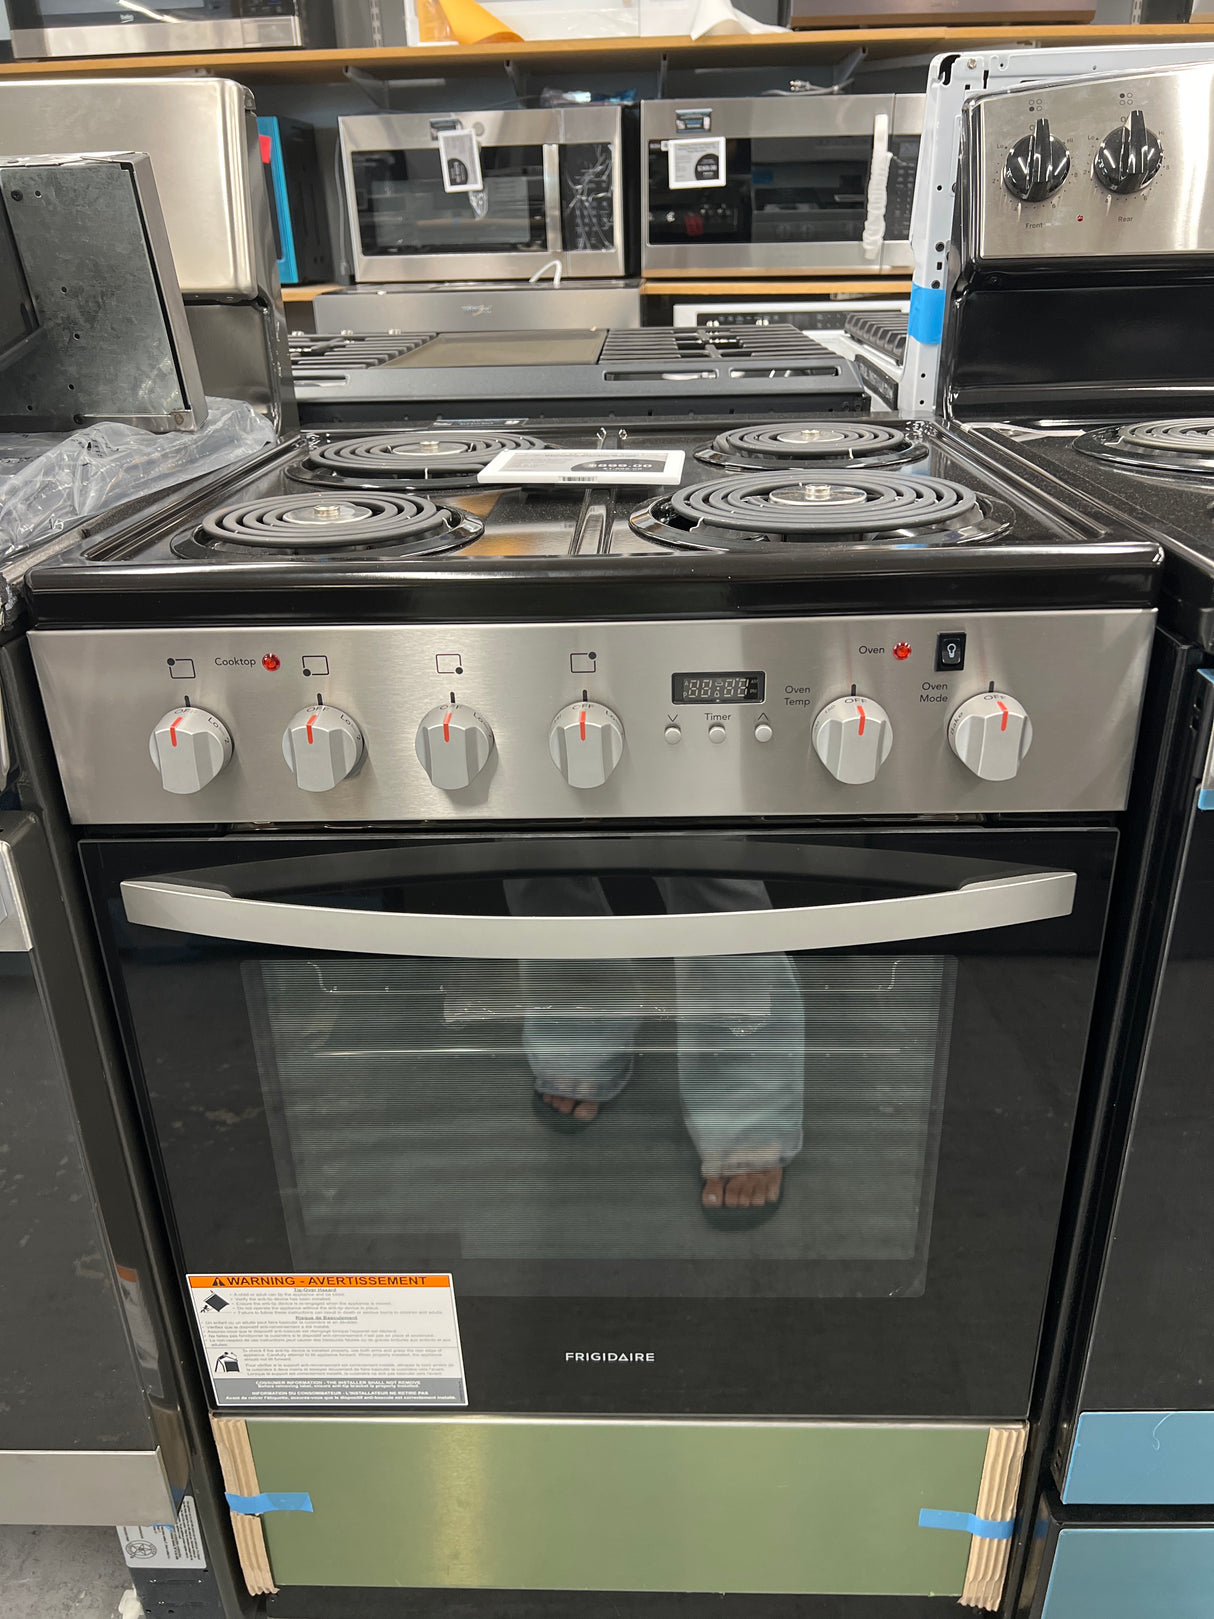 FFEH2422US FRIGIDAIRE 24” STAINLESS STEEL FREE STANDING ELECTRIC RANGE